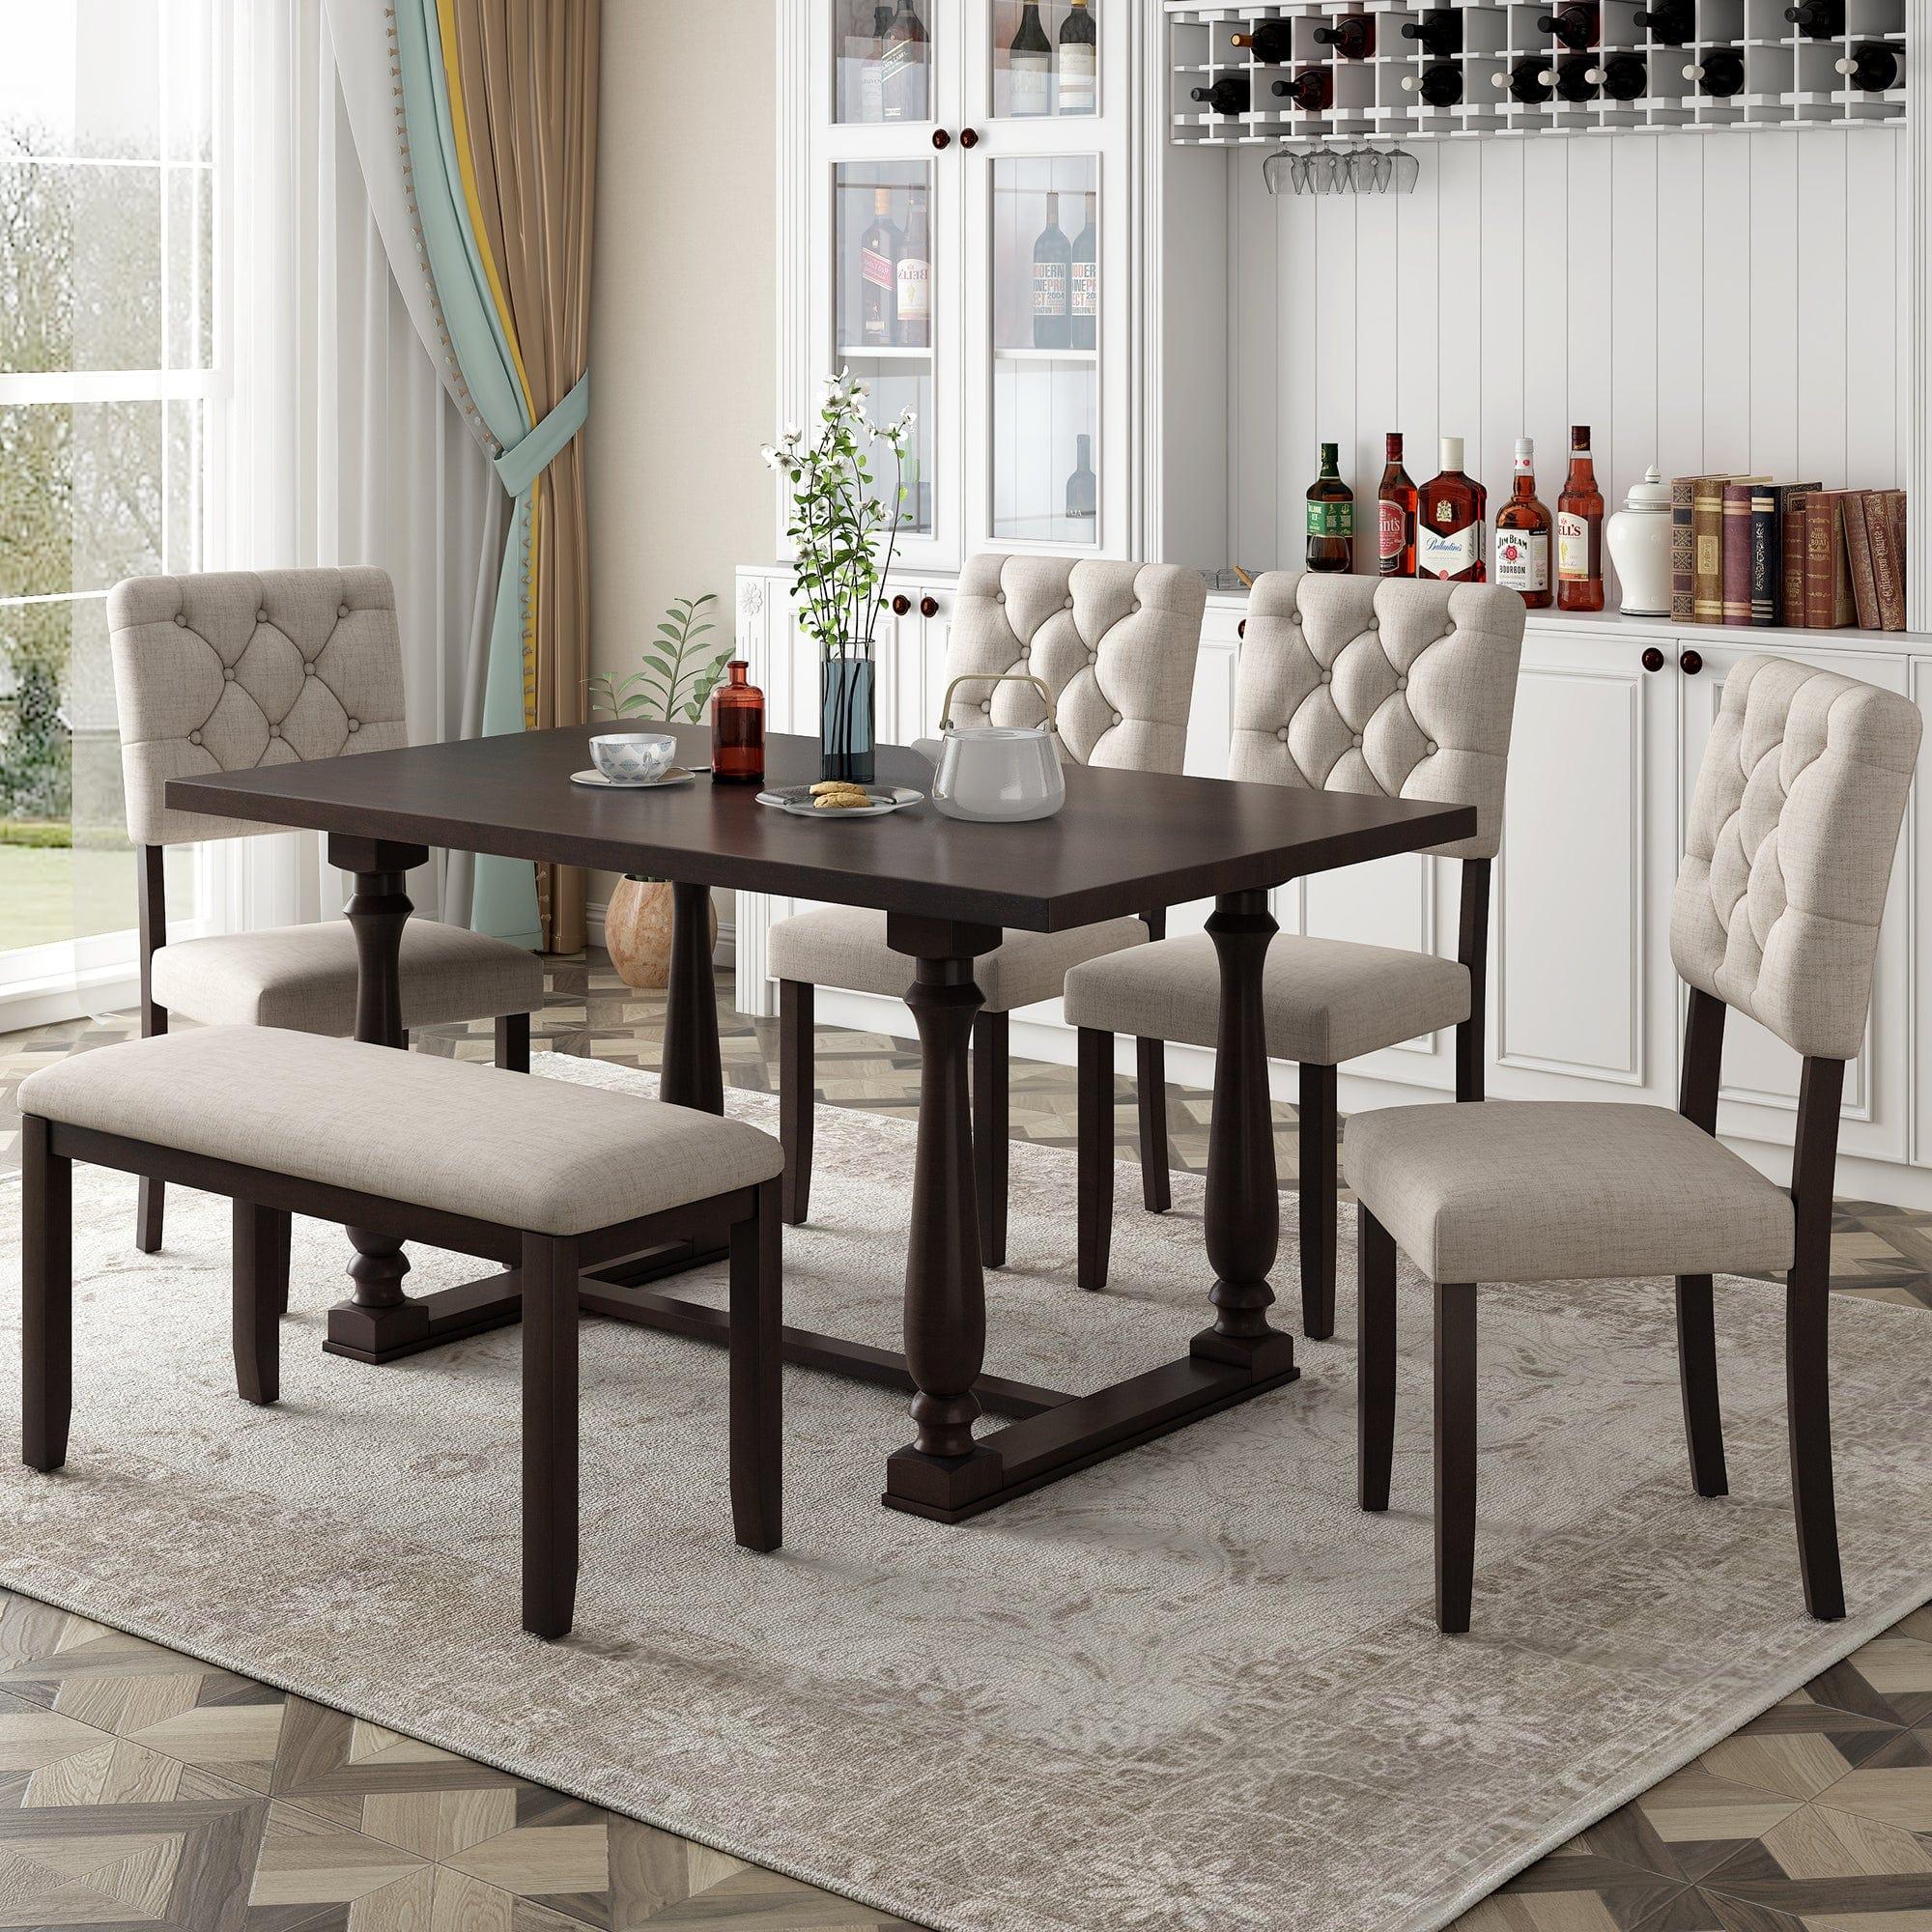 Shop TREXM 6-Piece Dining Table and Chair Set with Special-shaped Legs and Foam-covered Seat Backs&Cushions for Dining Room (Espresso) Mademoiselle Home Decor